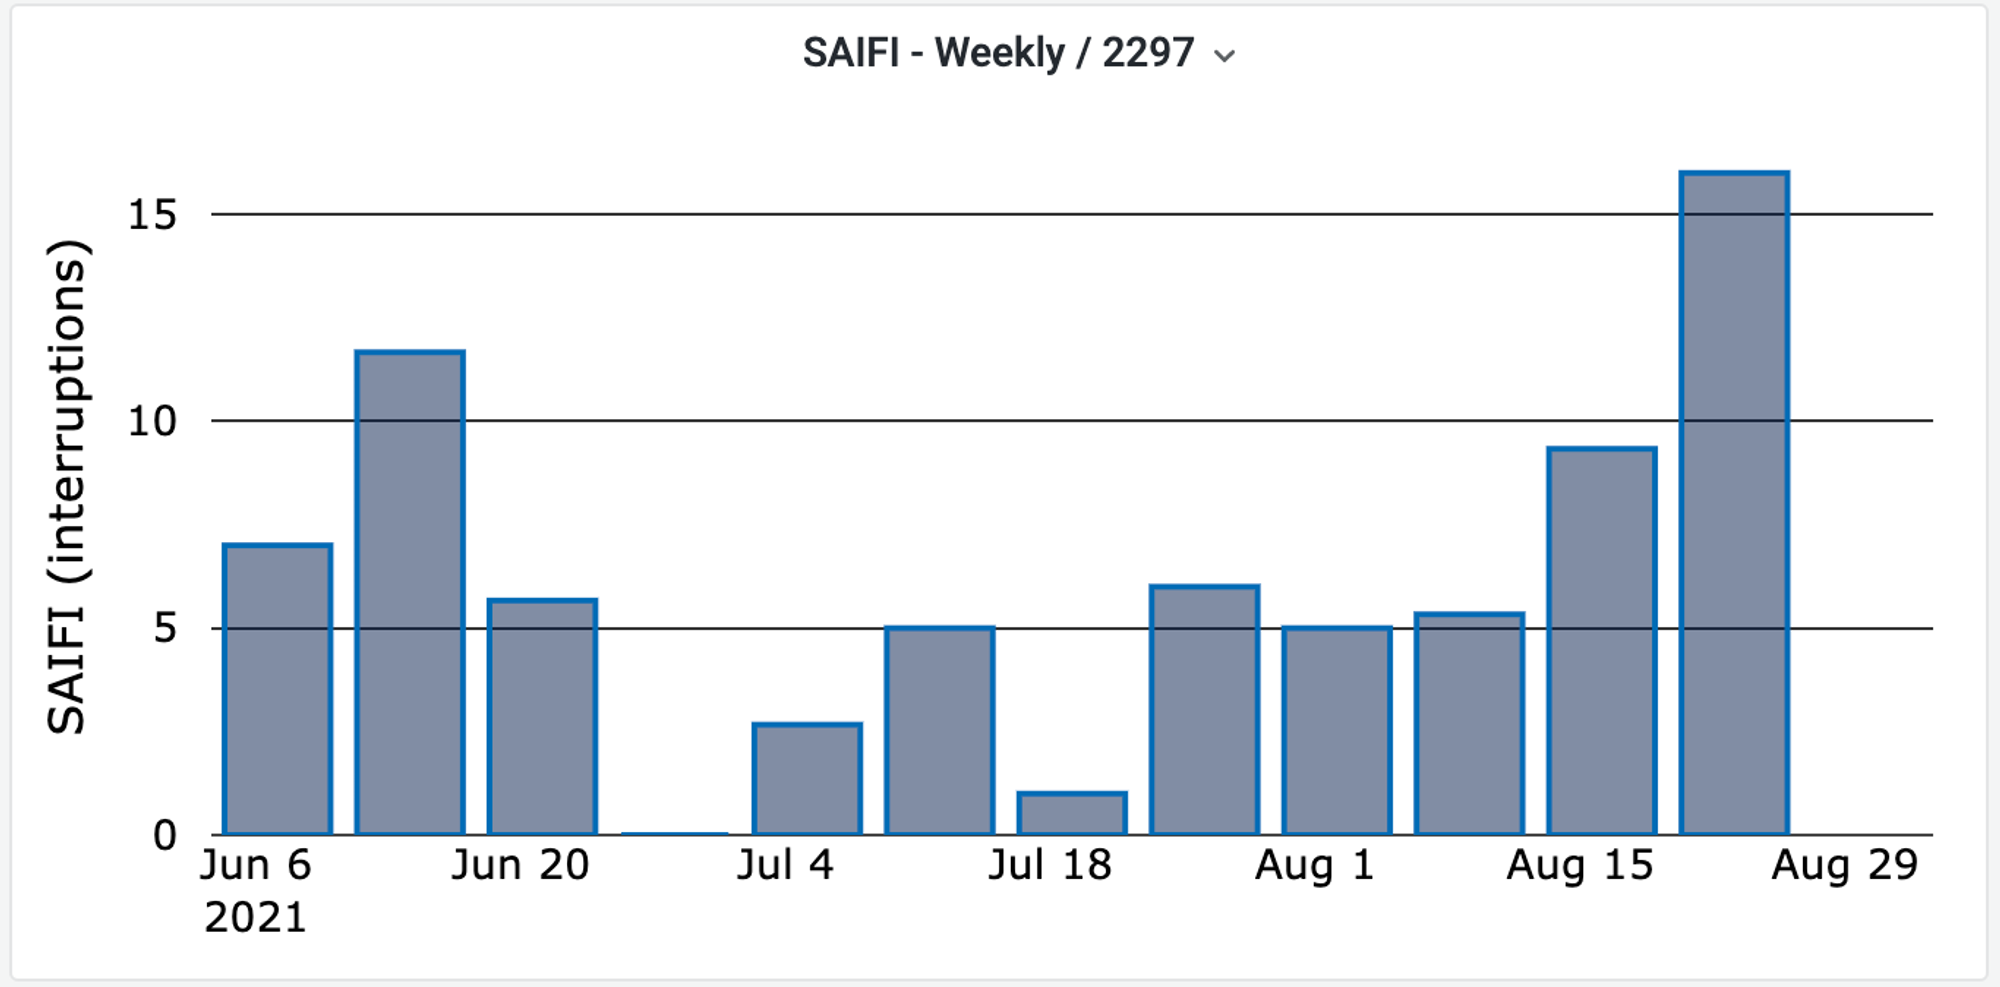 Figure 5: The weekly SAIDI and SAIFI for site 2297 over two months. Weekly SAIDI is the estimated average duration of outage hours experienced by a household in a week. Weekly SAIFI is the estimated average number of outage hours experienced by a household in a week. We observed SAIDI values as high as 50 hours per week, i.e. the average household in that site experienced approximately 50 hours of power outage that week. For the days with no bars (for both SAIDI and SAIFI), there was no power outage recorded by the sensor.